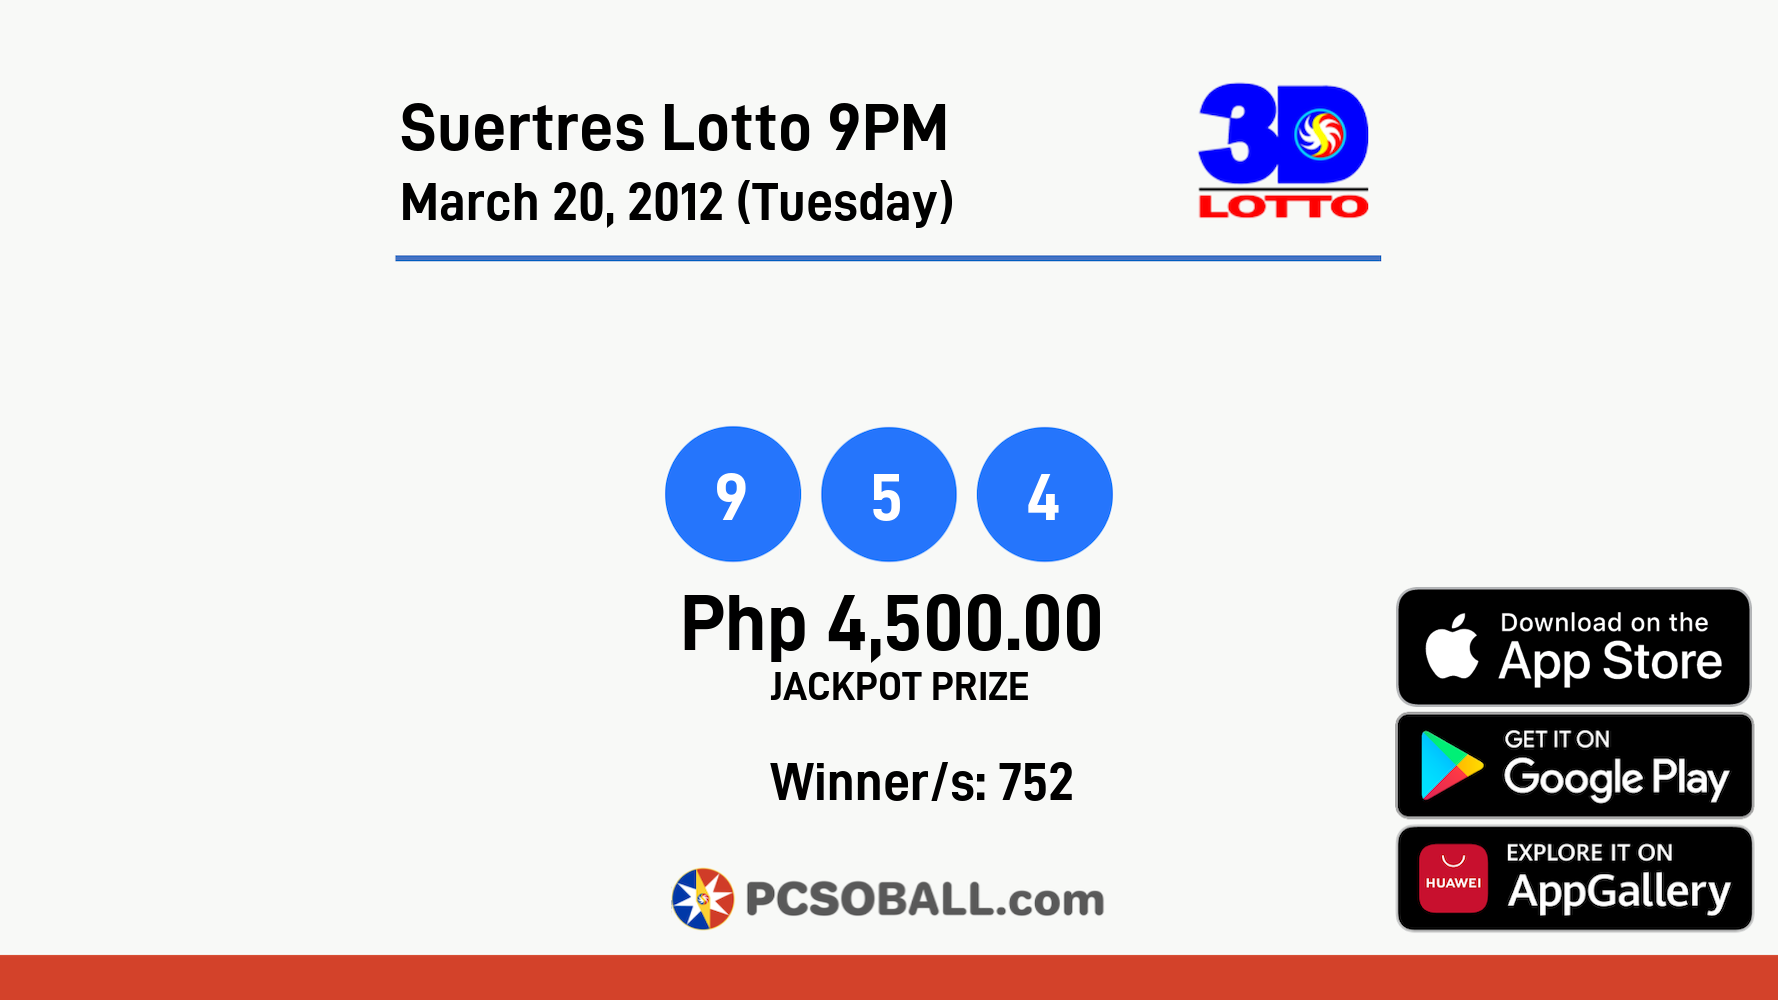 Suertres Lotto 9PM March 20, 2012 (Tuesday) Result